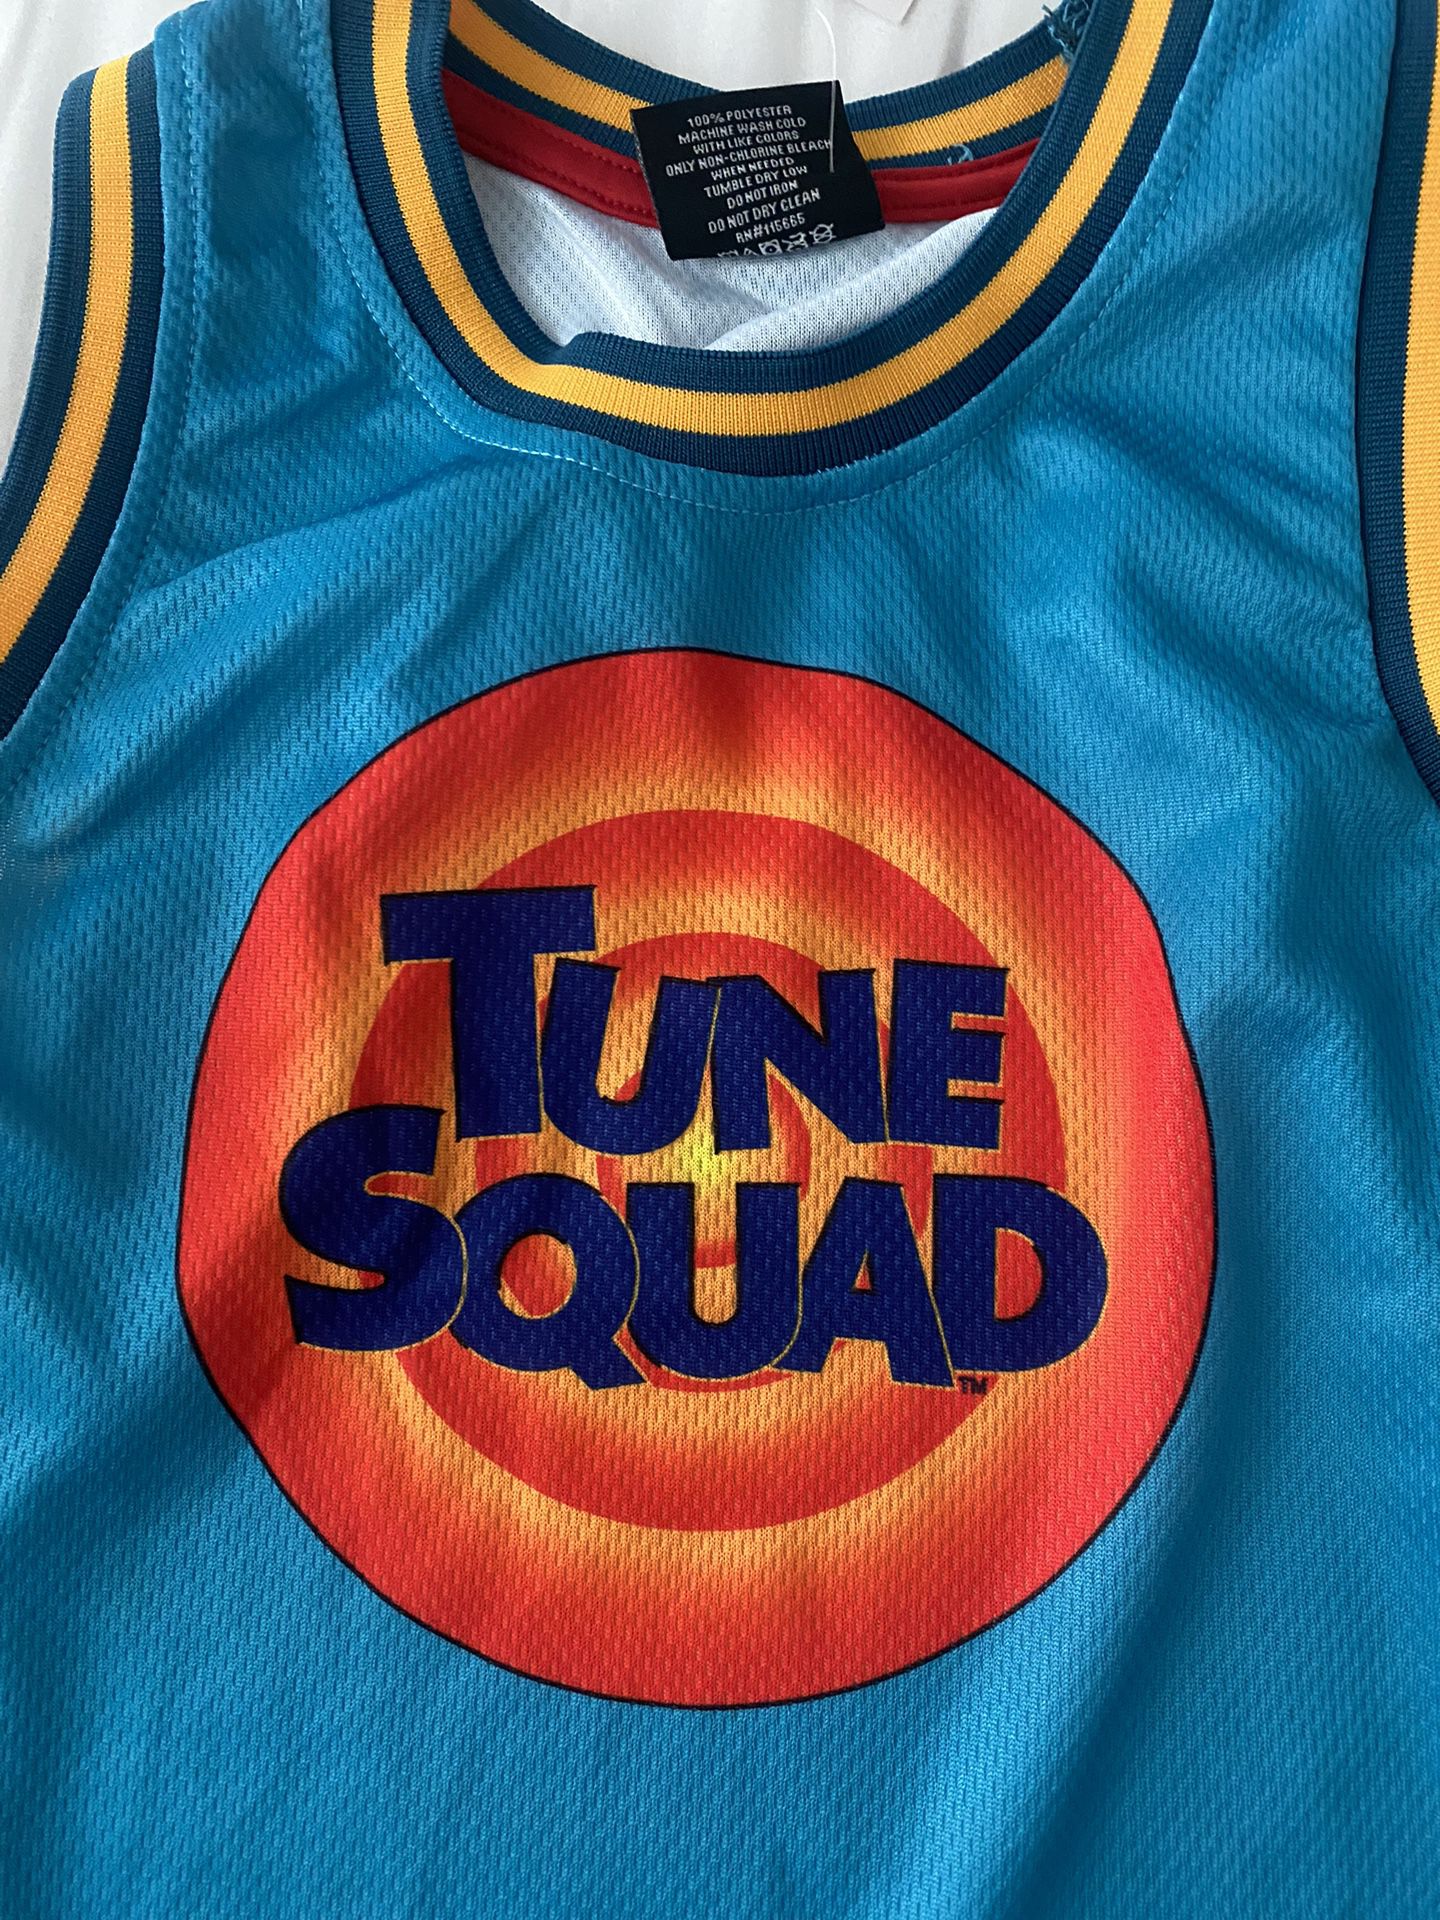 Basketball Space Jam Jerseys Michael Jordan #23 Space Jam Tune Squad Looney  Tunes Jersey for Sale in Baldwin, NY - OfferUp